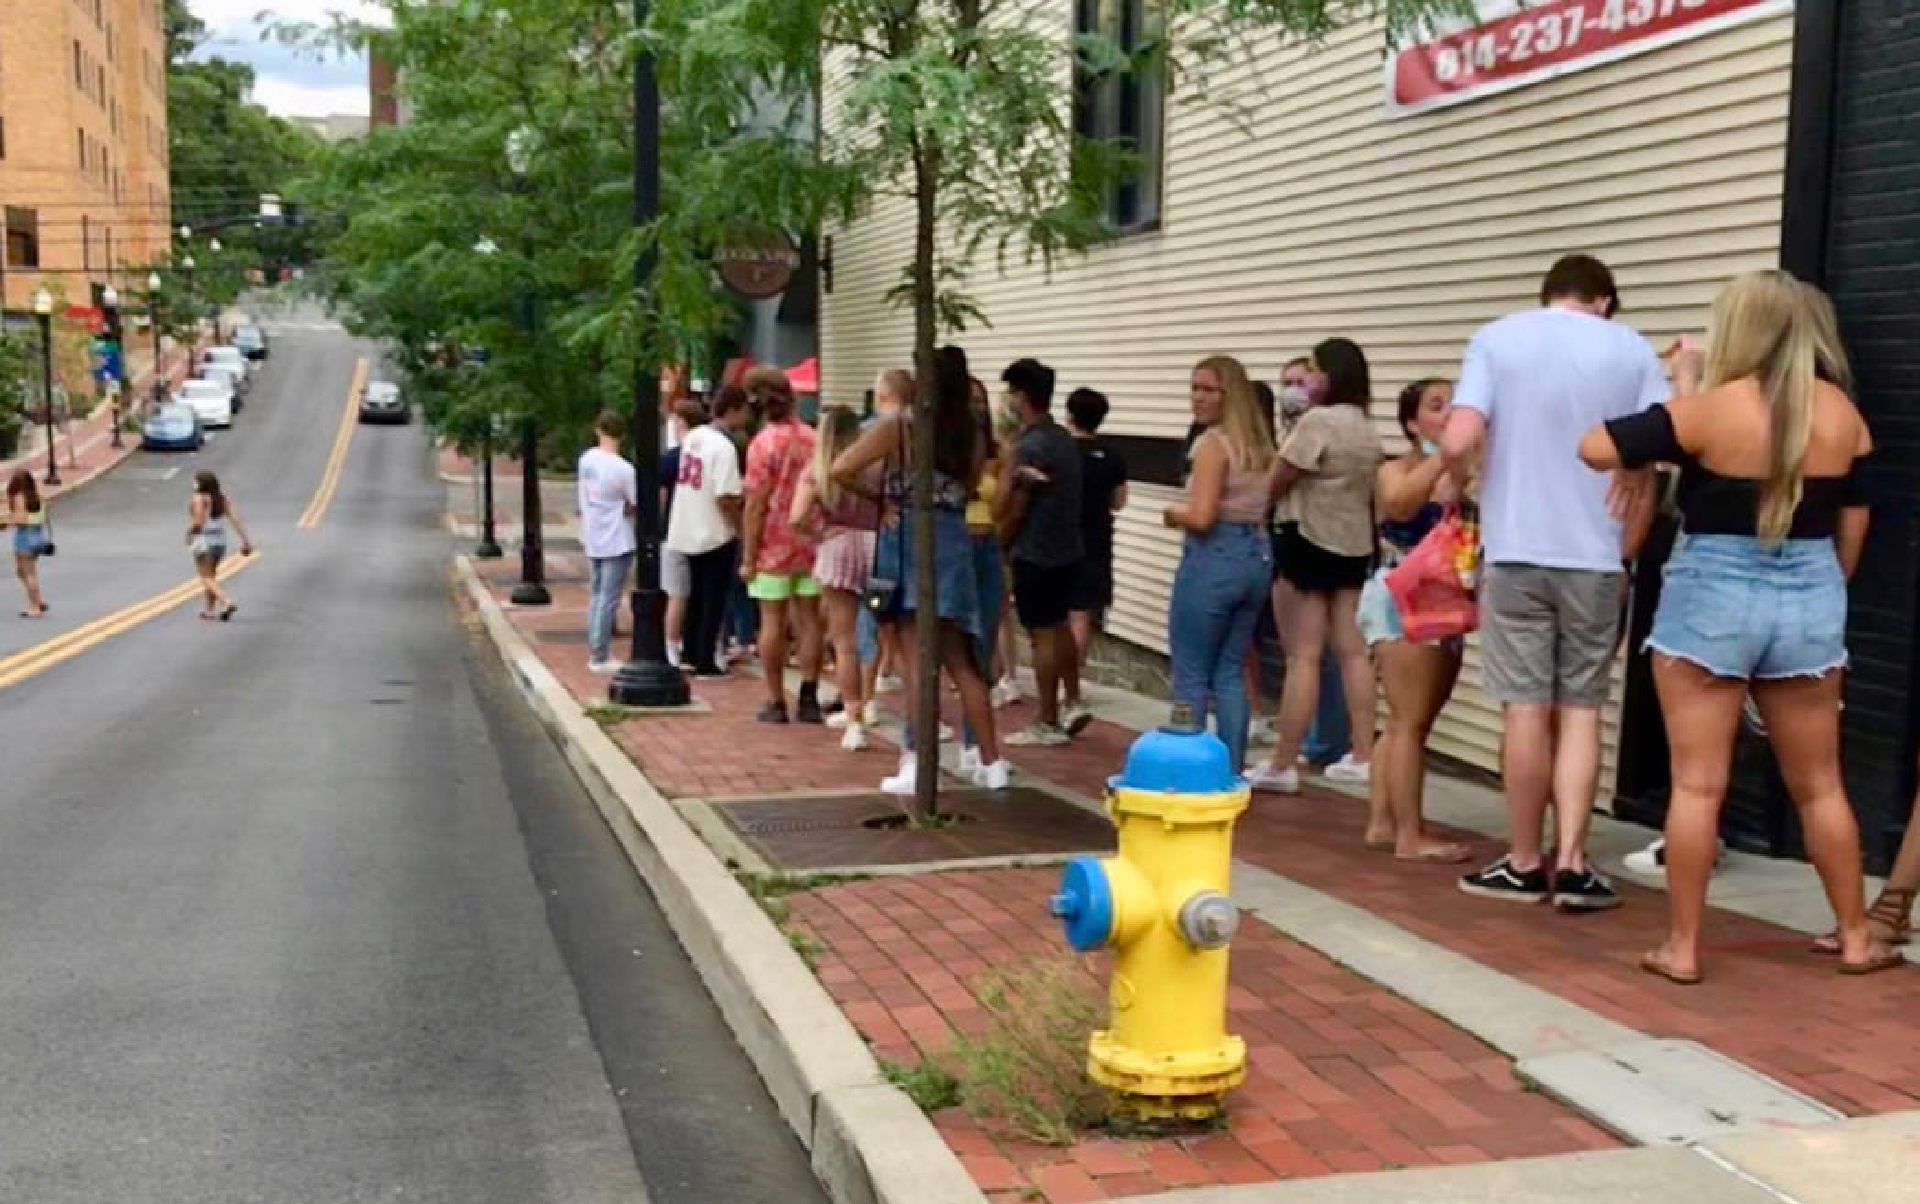 A line outside Doggie's Pub on Pugh Street in State College July 11, 2020.